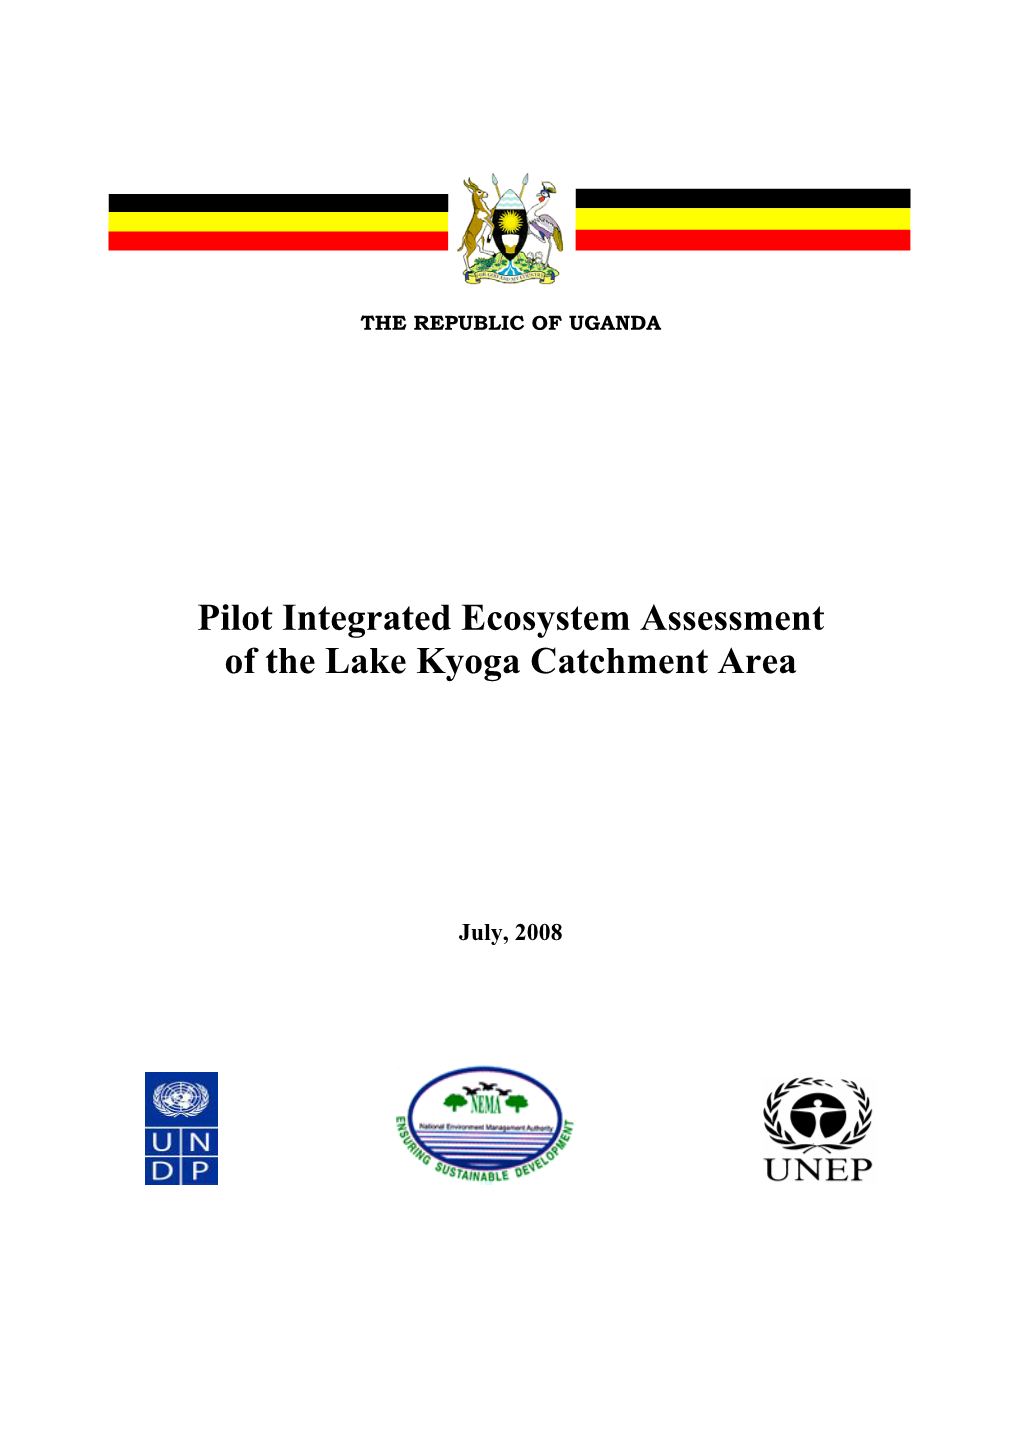 Pilot Integrated Ecosystem Assessment of the Lake Kyoga Catchment Area